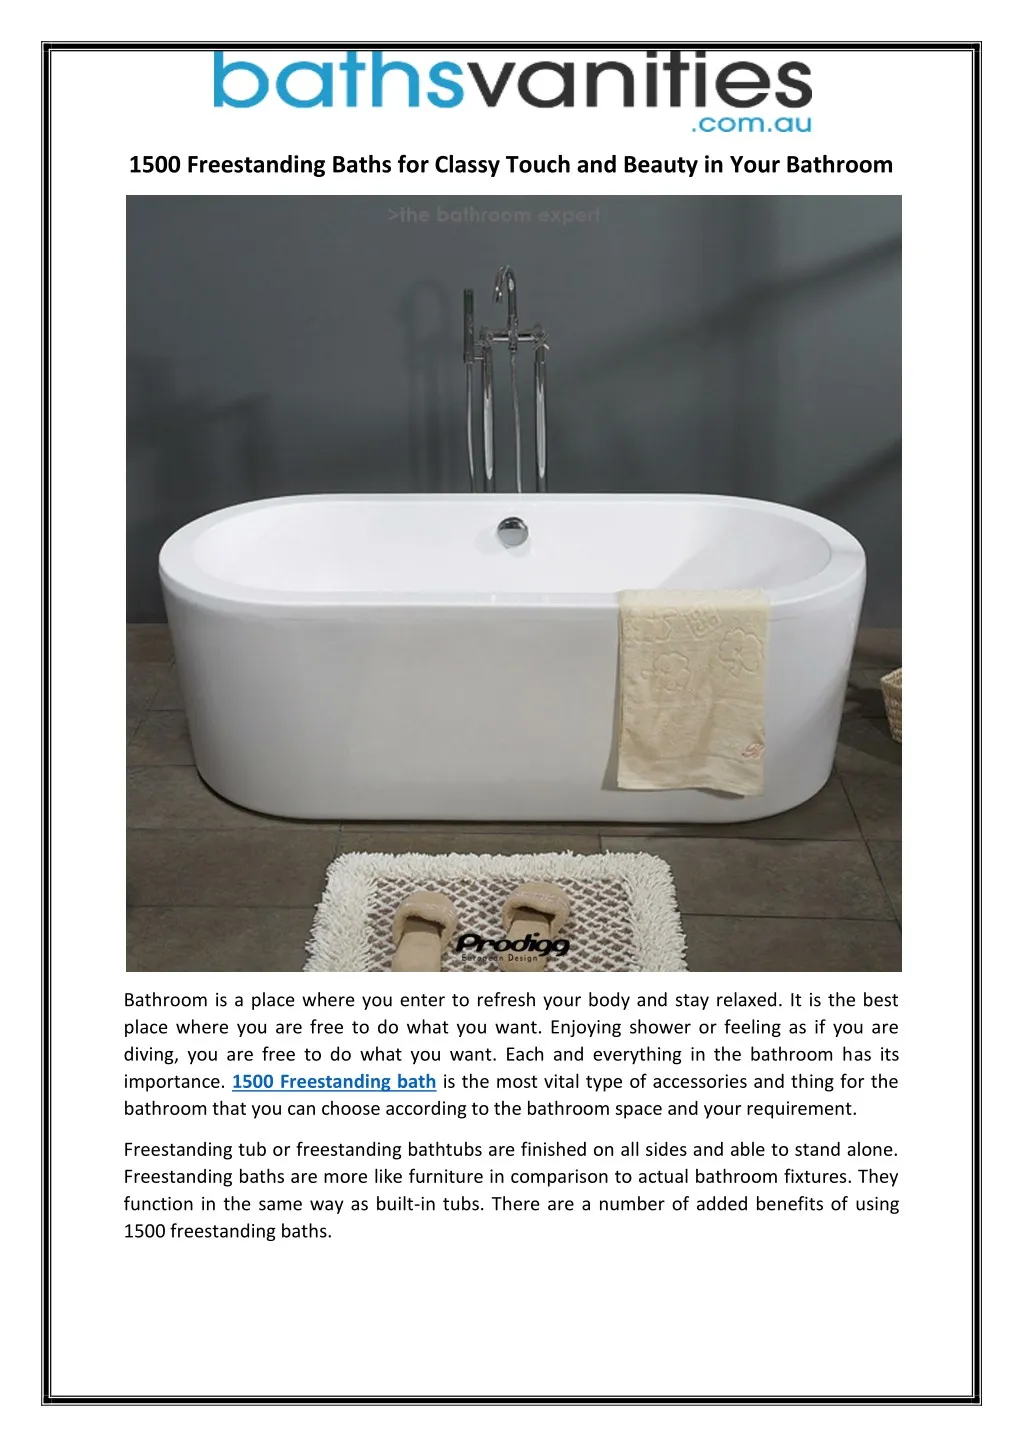 1500 freestanding baths for classy touch